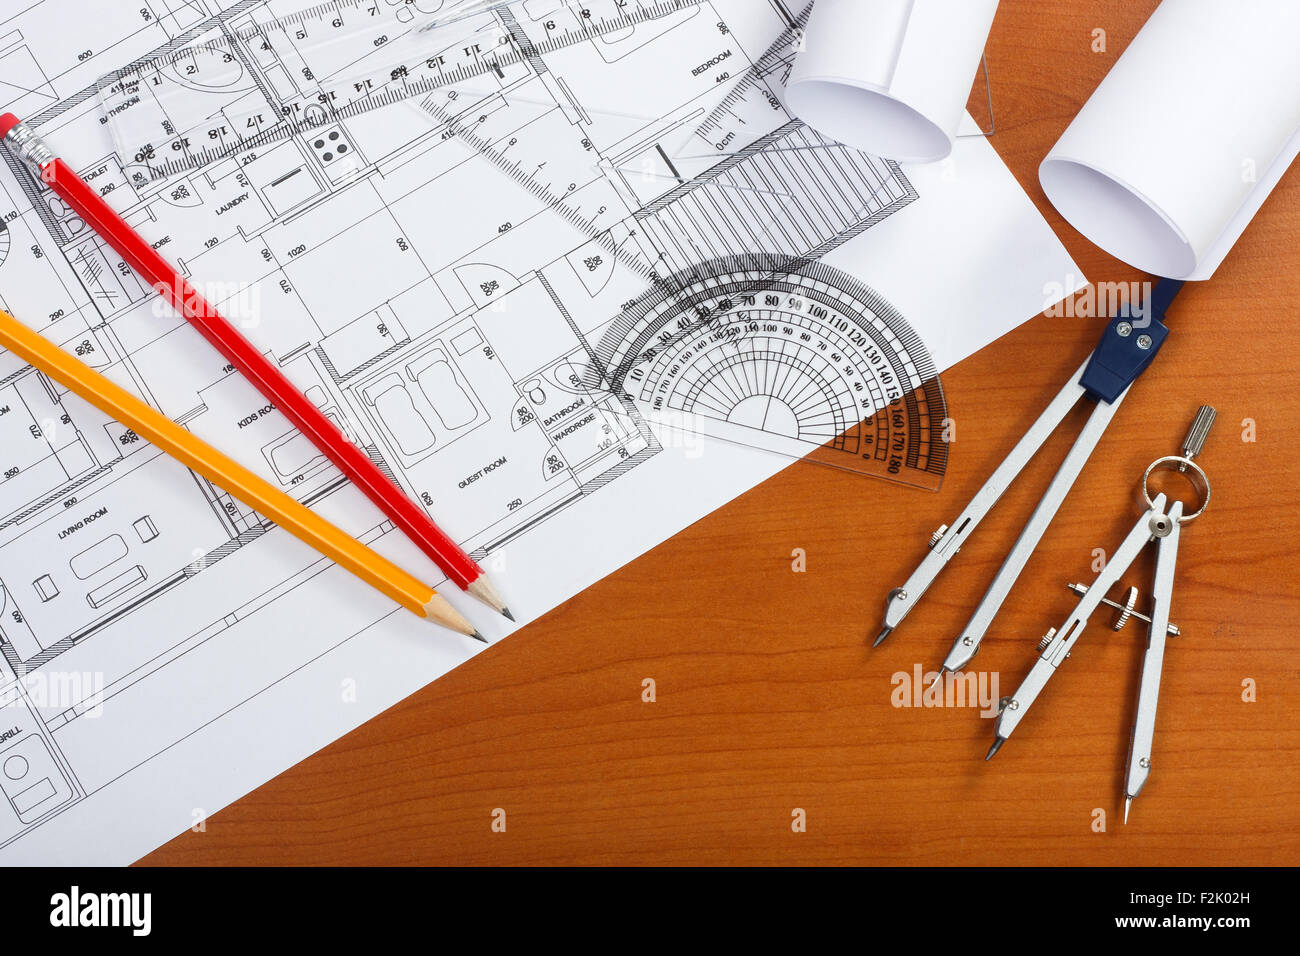 Architectural plans, pencils and ruler on the desk Stock Photo